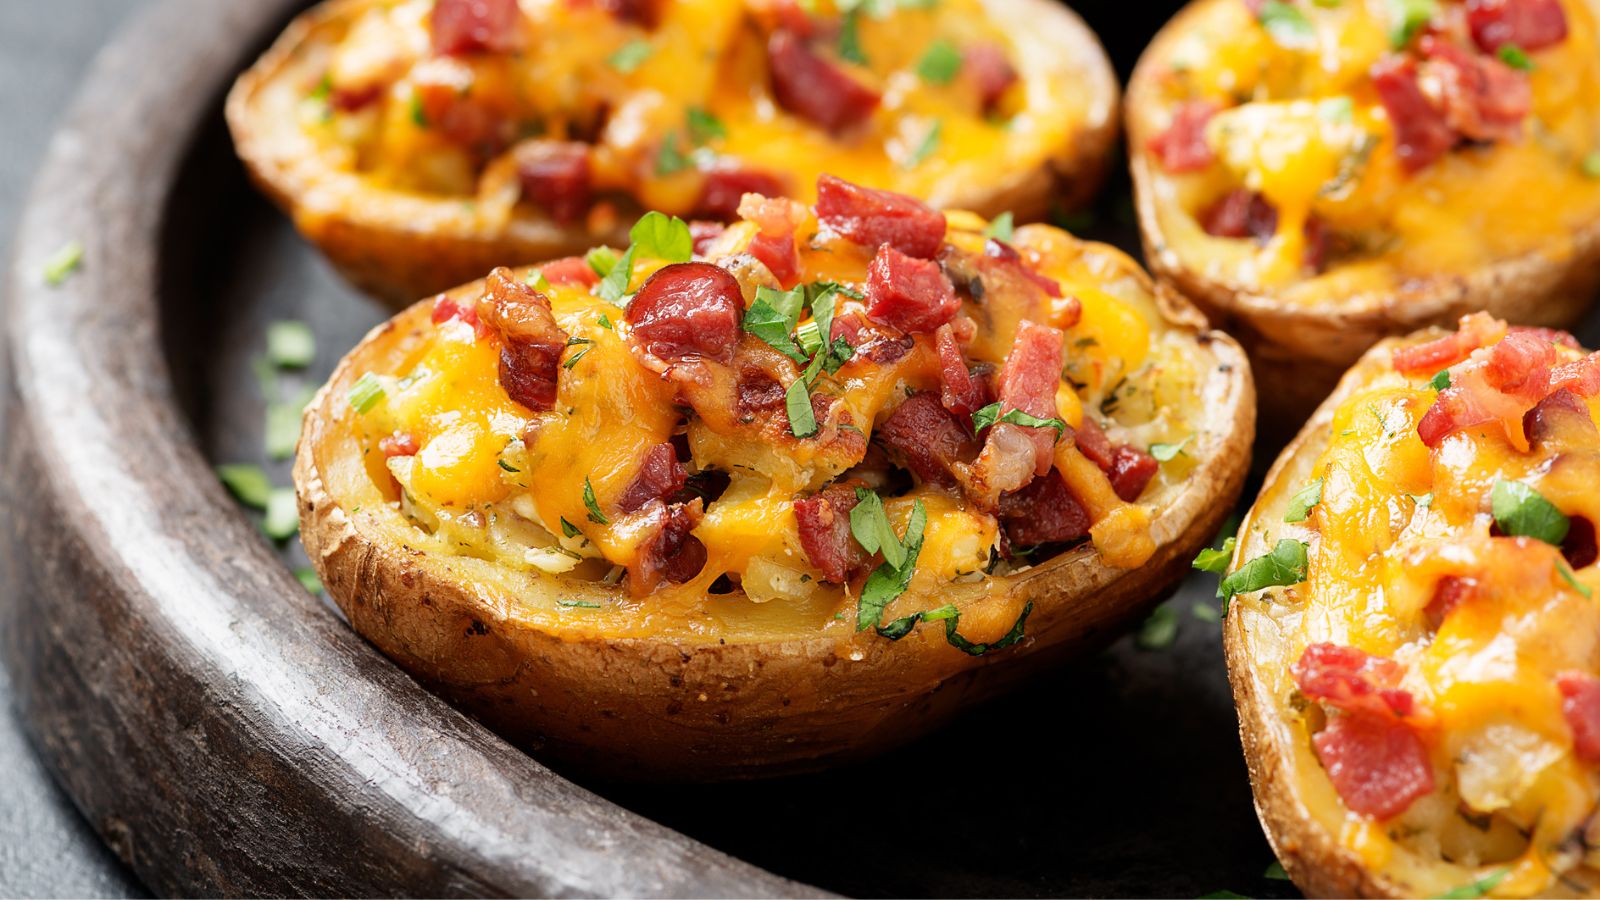 22 Potato Recipes for Dinner That You’ll Eat Right Up